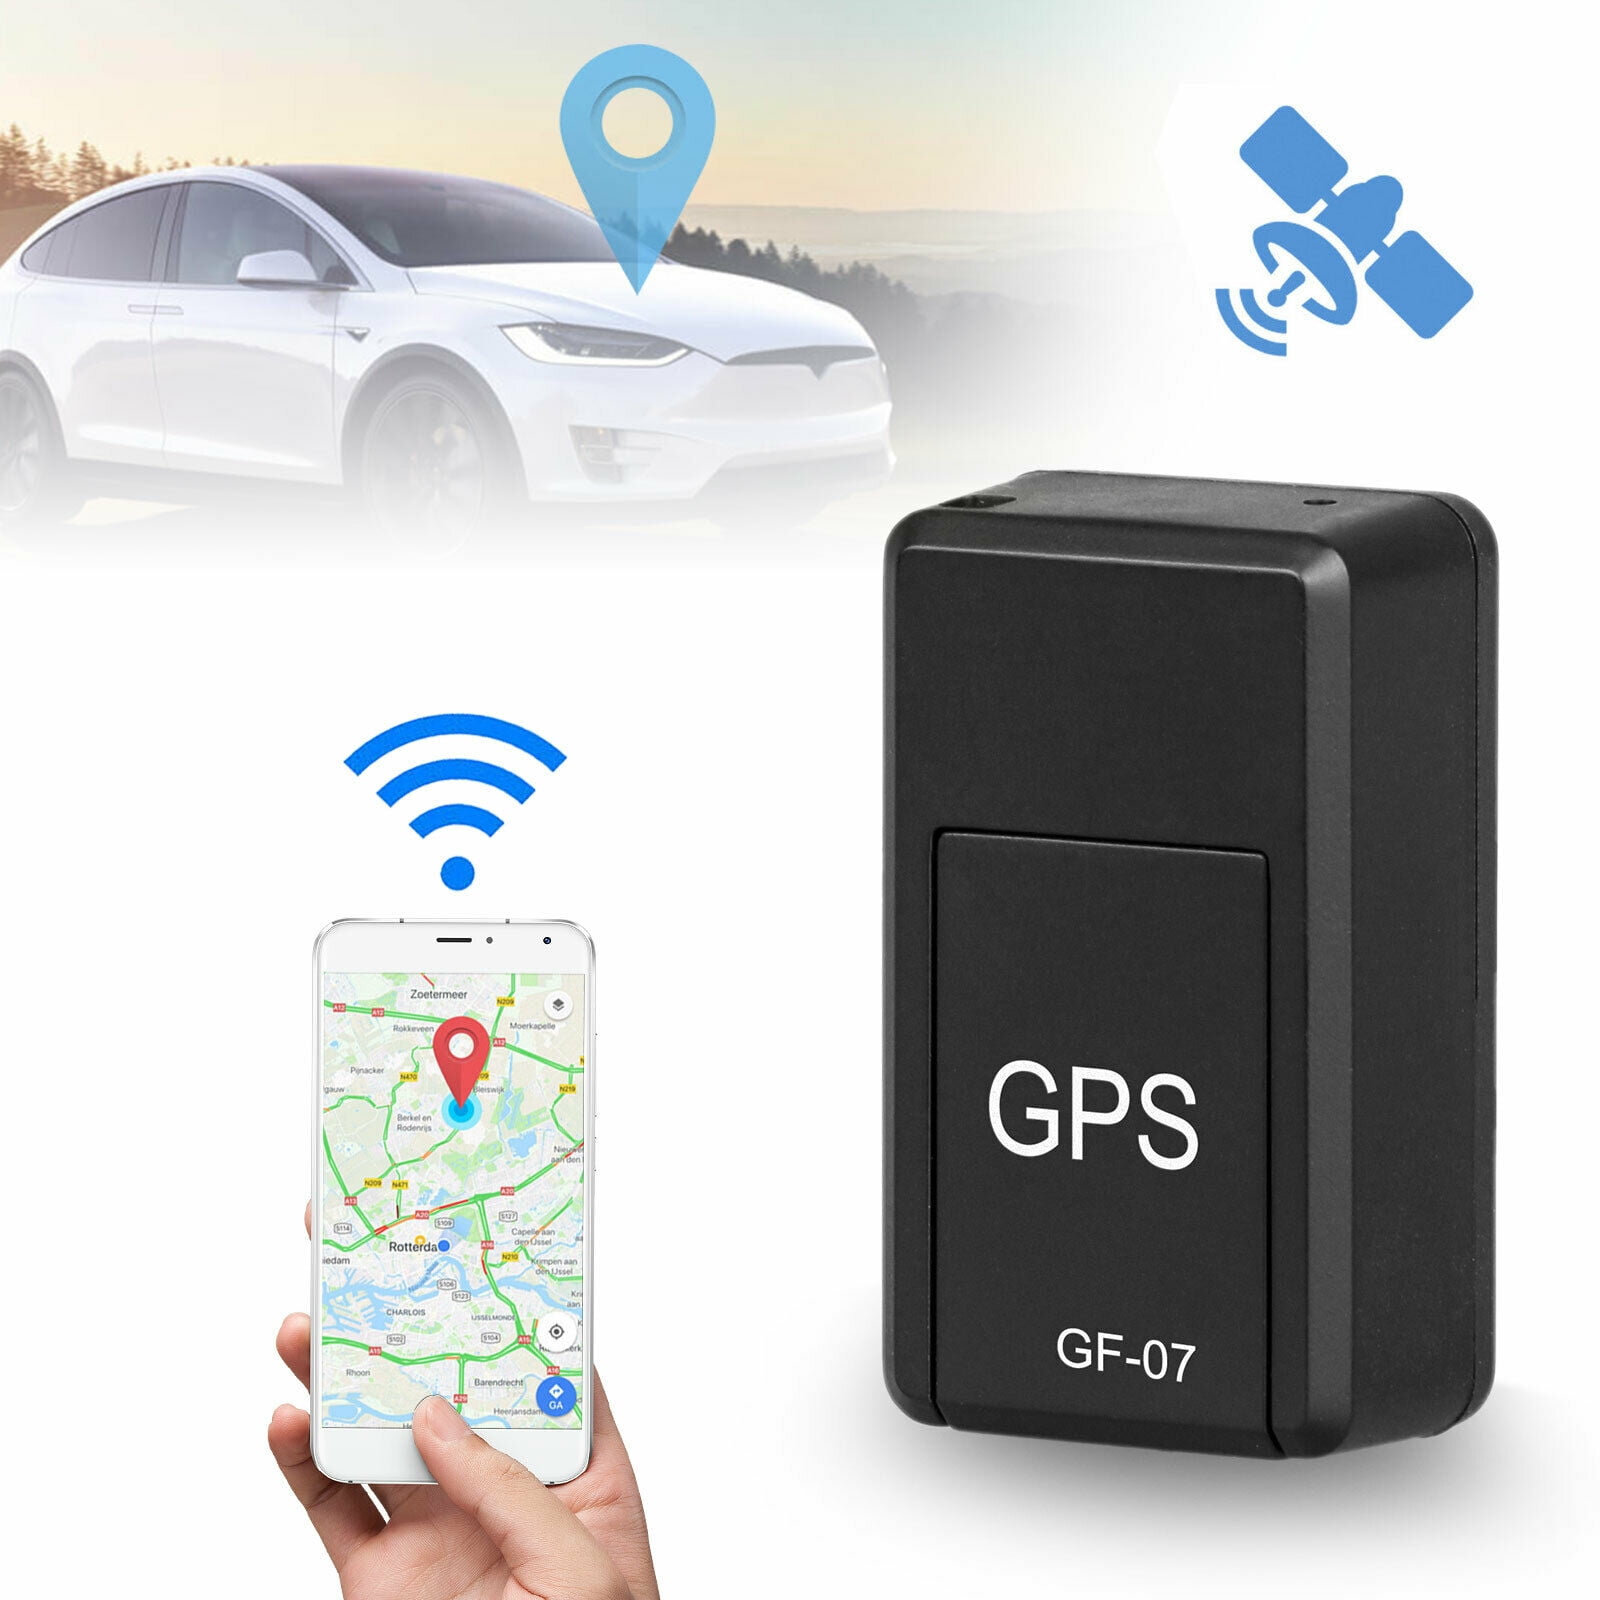 Car Tracker Device-Lifetime Free Tracking Real Time 3G GPS Tracker Car Tracking Device Hidden Outdoor Strong Magnet Gear Waterproof Locator for Fleet Vehicle Motorcycle Truck Magnets 20000mAh 